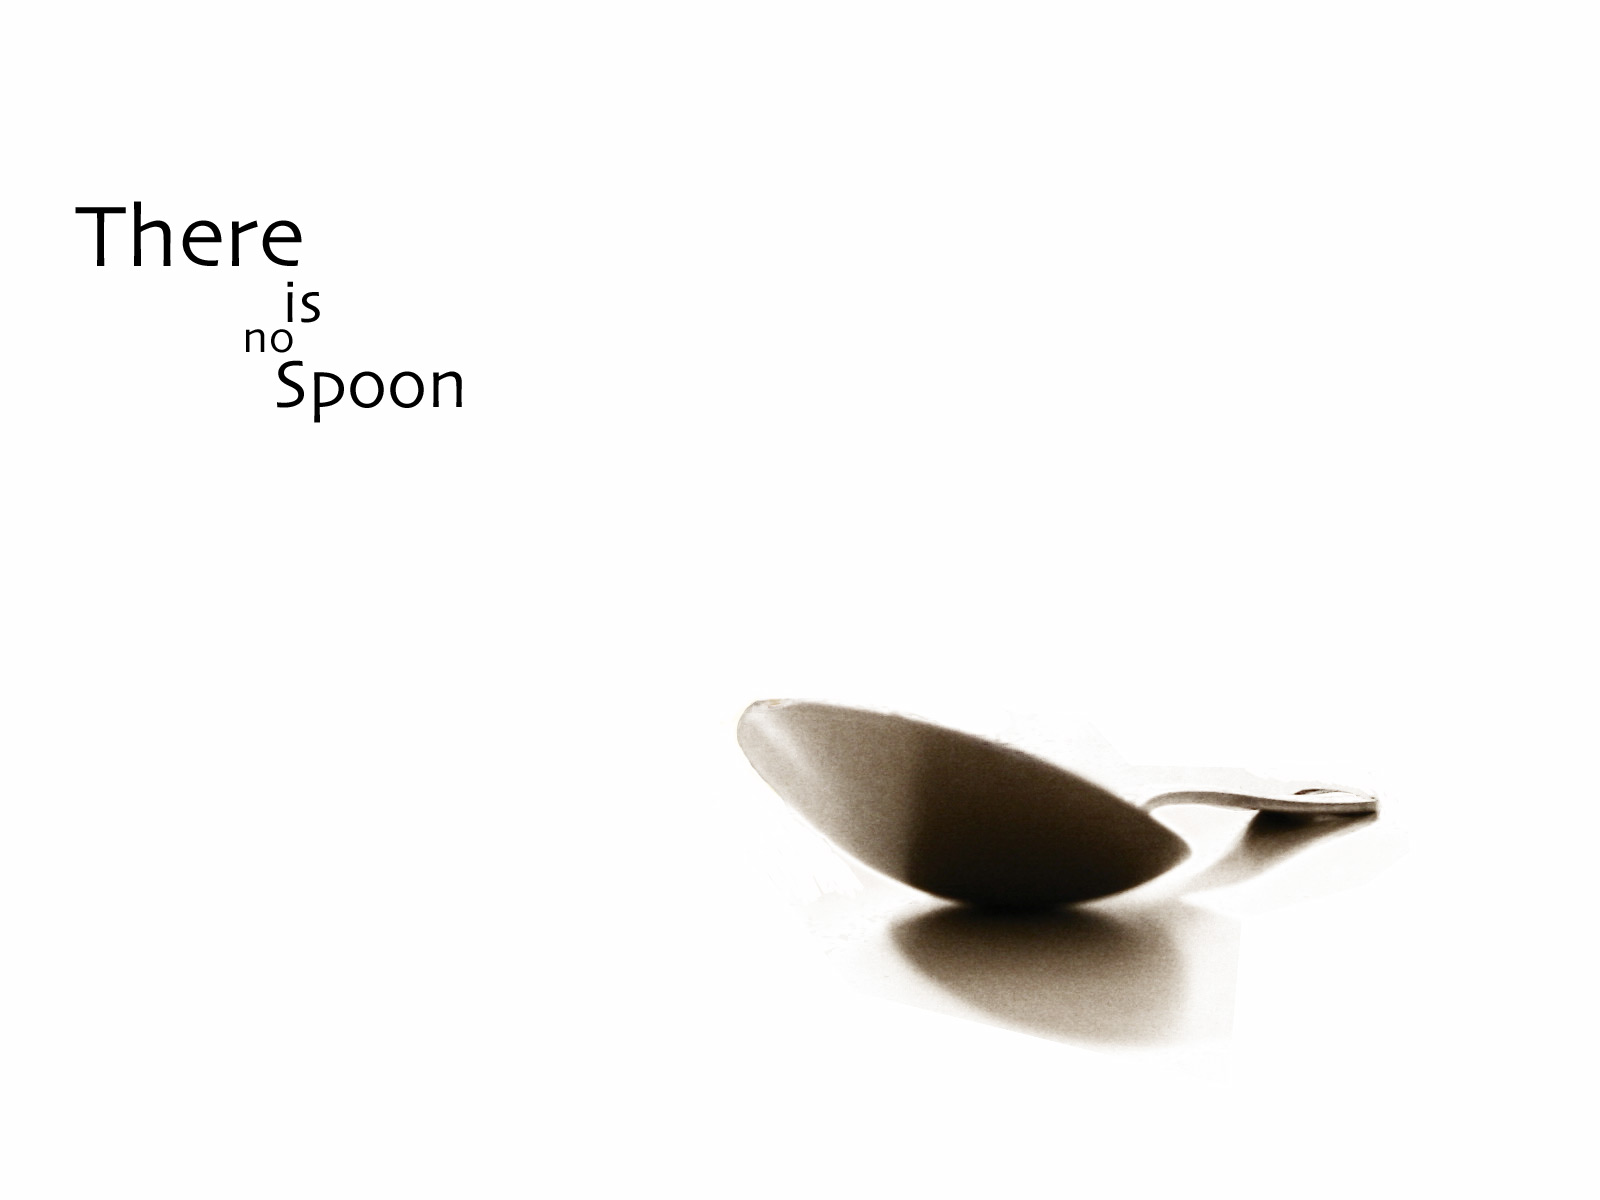 [There_is_no_spoon_-_1600x1200.jpg]